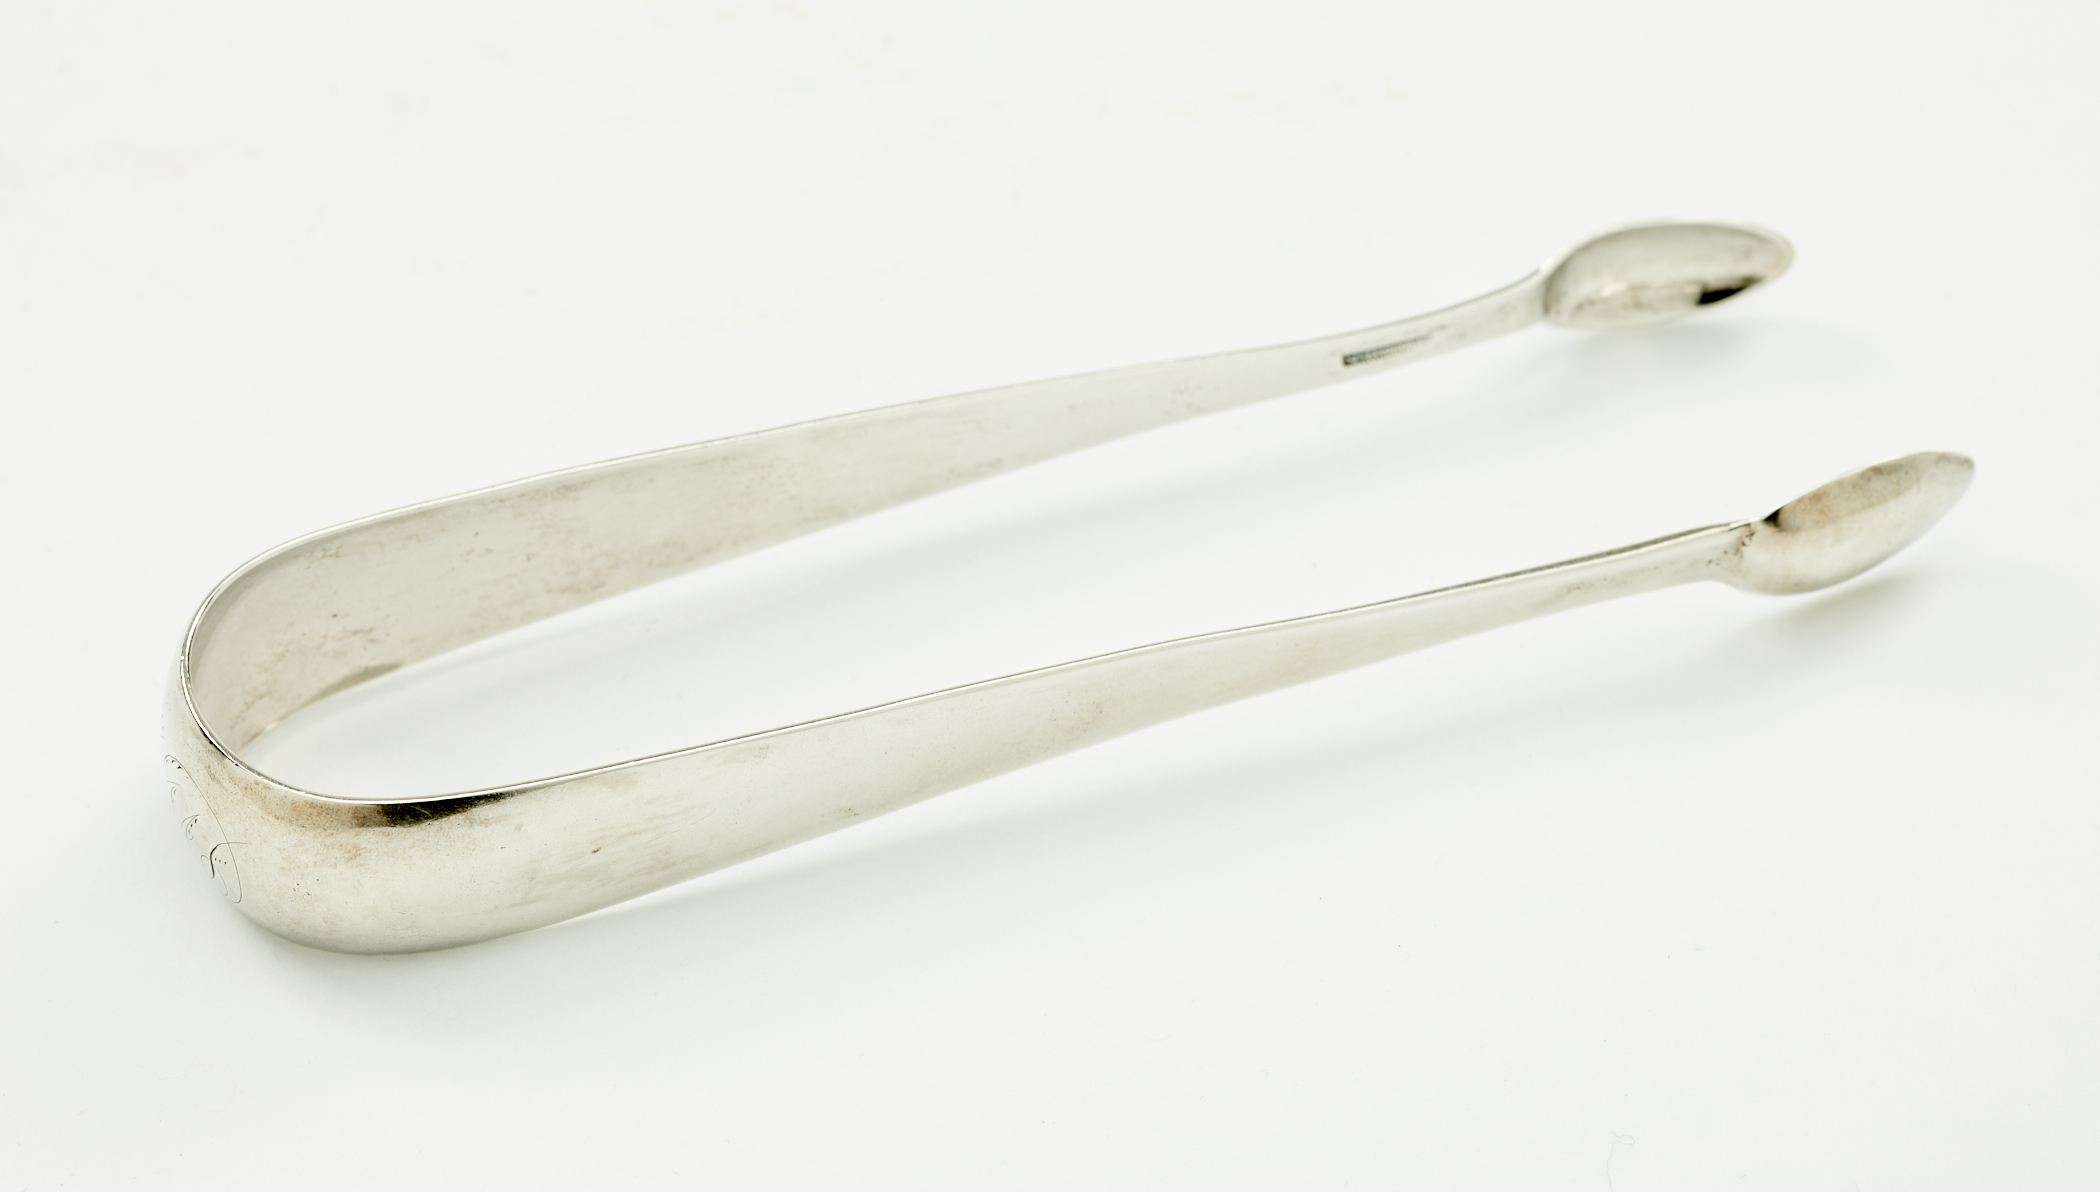 /Silver%20sugar%20tongs%20with%20small%20ends%20and%20a%20thicker%20handle%20portion.